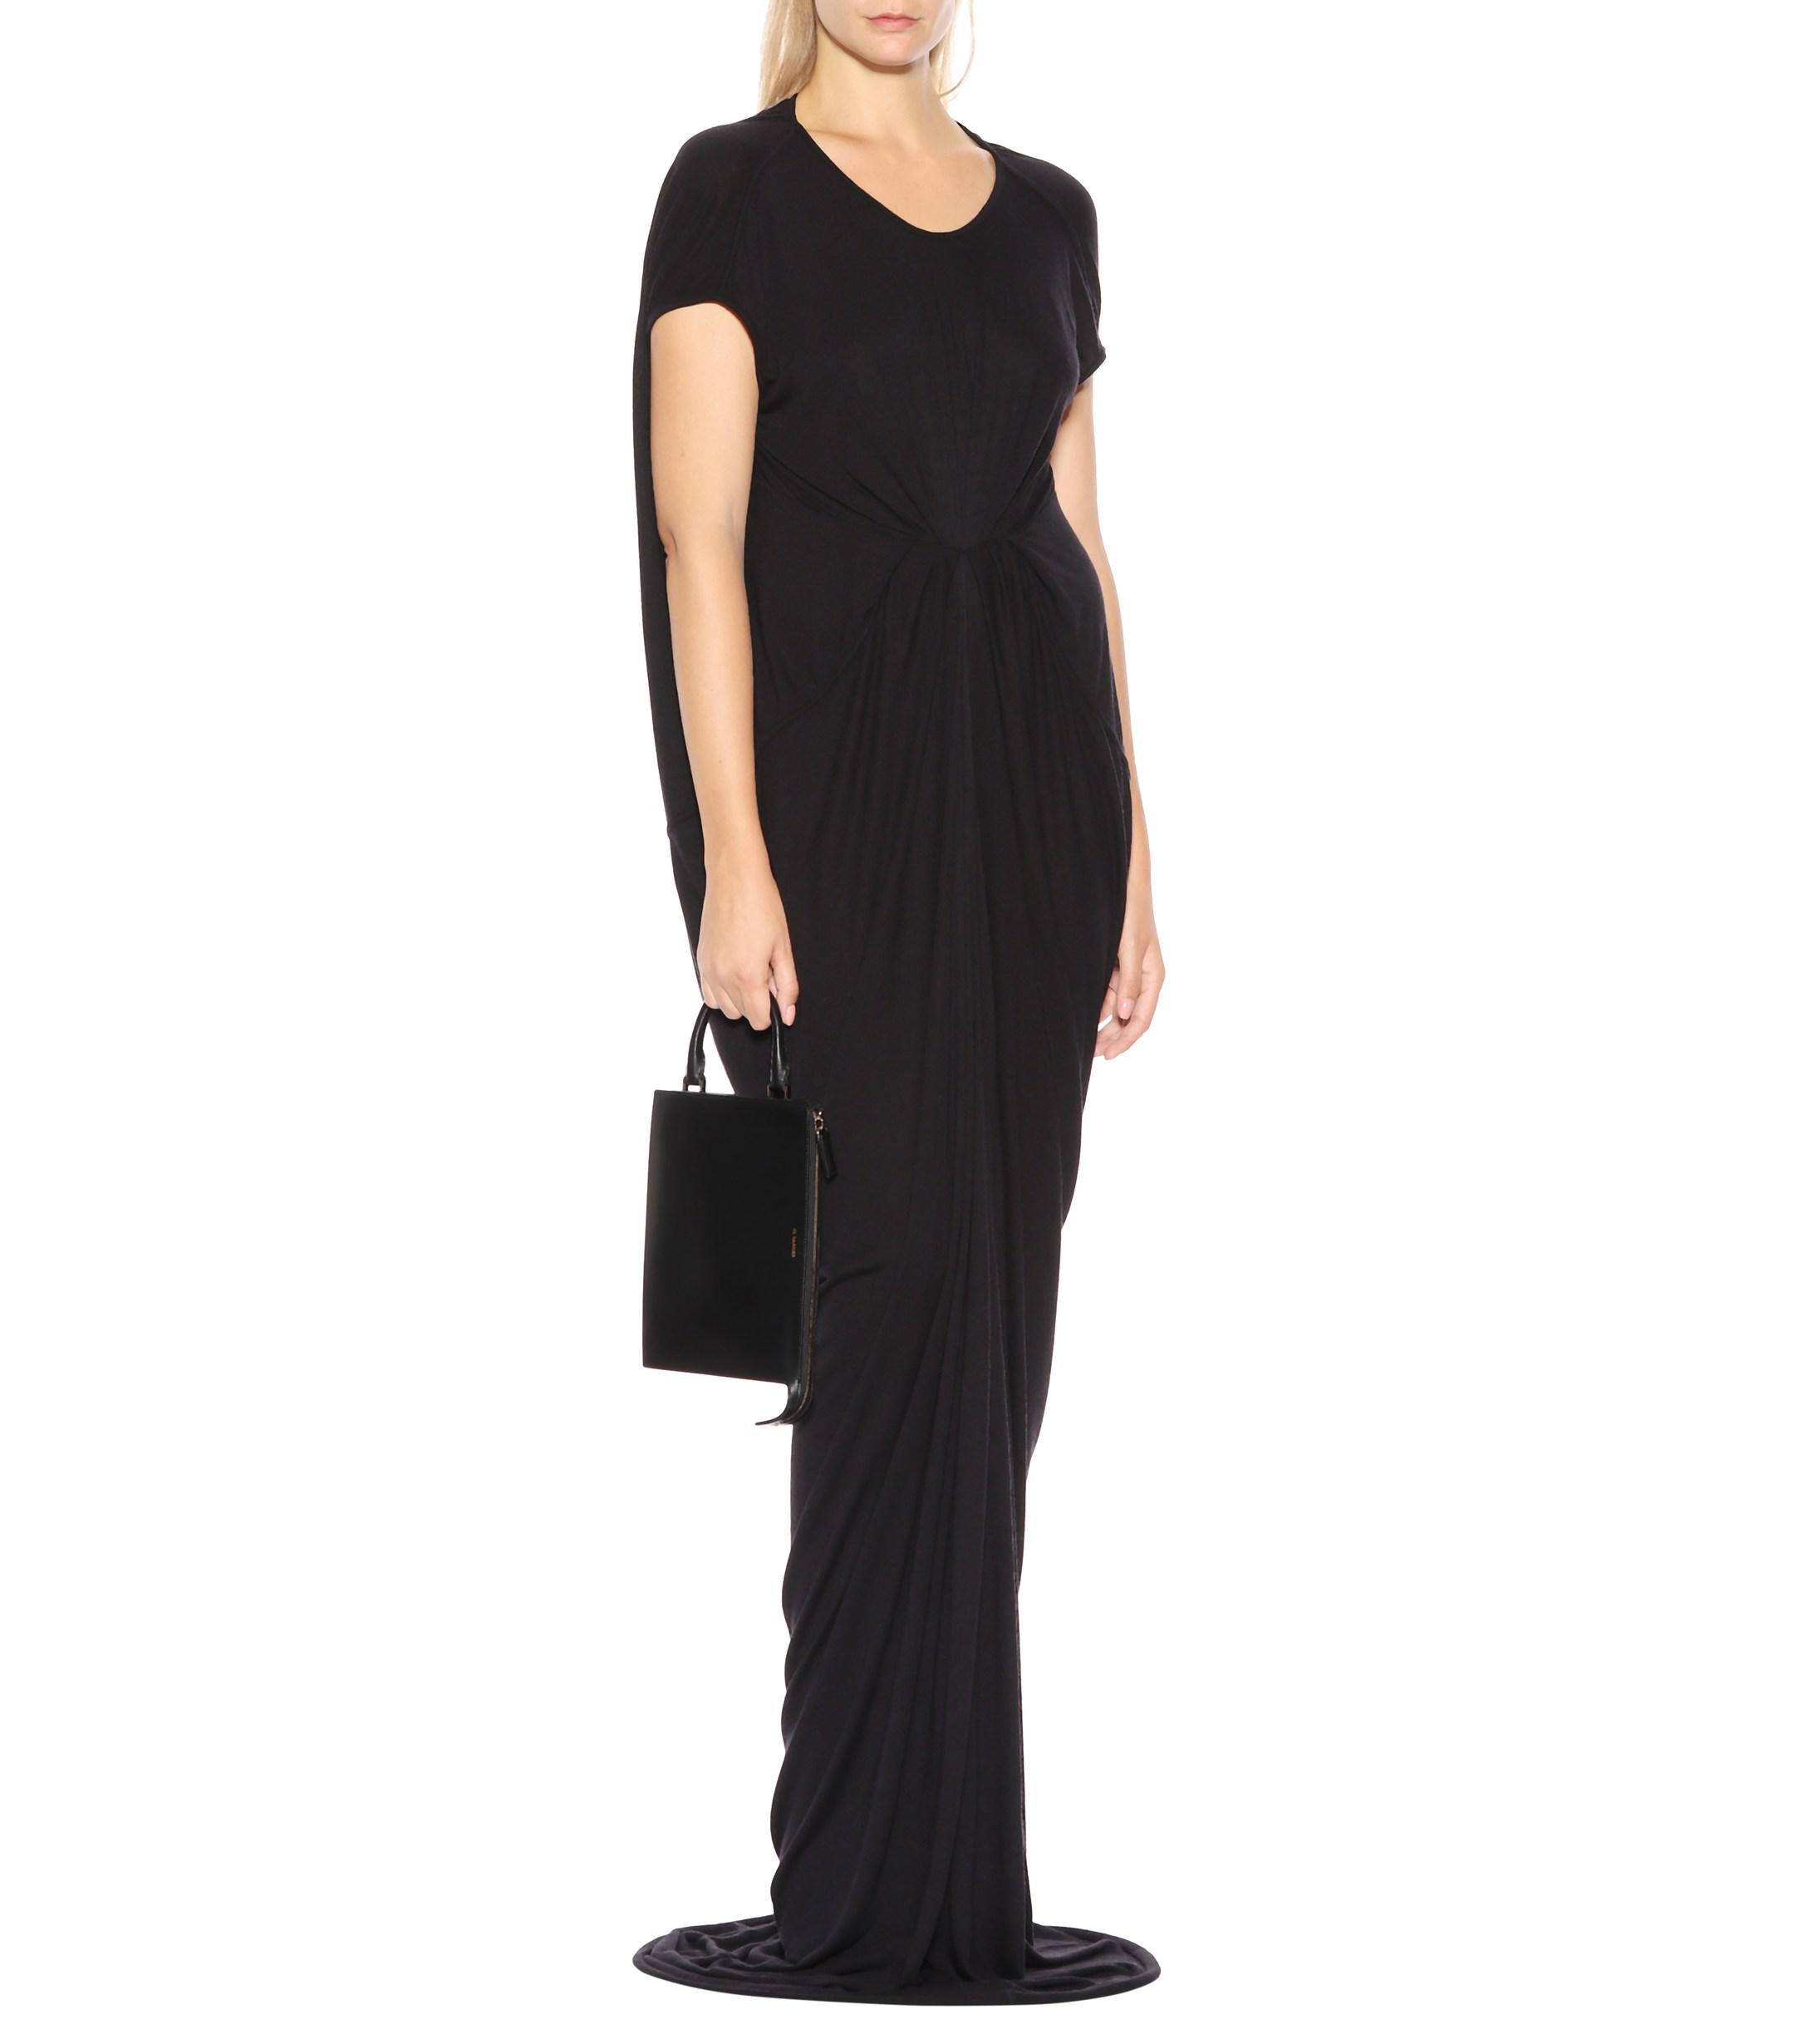 Rick Owens Synthetic Lilies Knit Maxi Dress in Black - Lyst